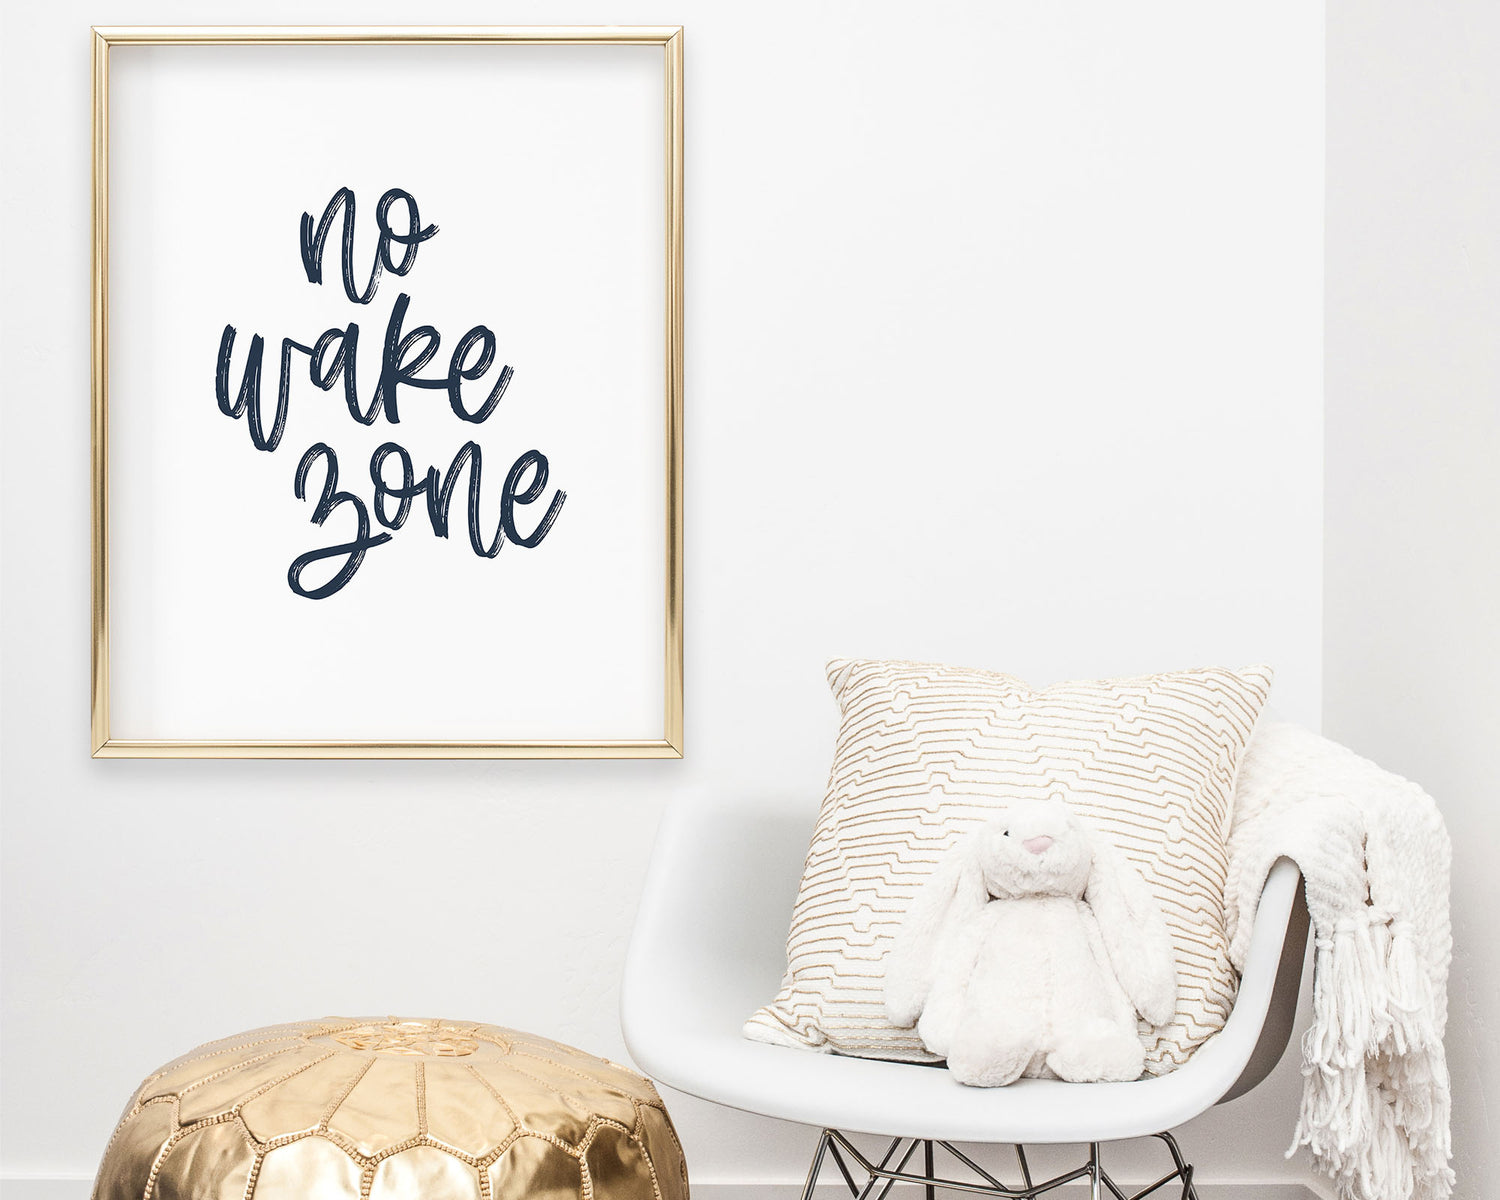 Navy Blue No Wake Zone Printable Wall Art featuring a textured brush style cursive lettered quote perfect for Baby Boy Nautical Nursery Decor, Baby Girl Surf Nursery Wall Art, Nautical Kids Bedroom Decor or Children's Coastal Wall Art.